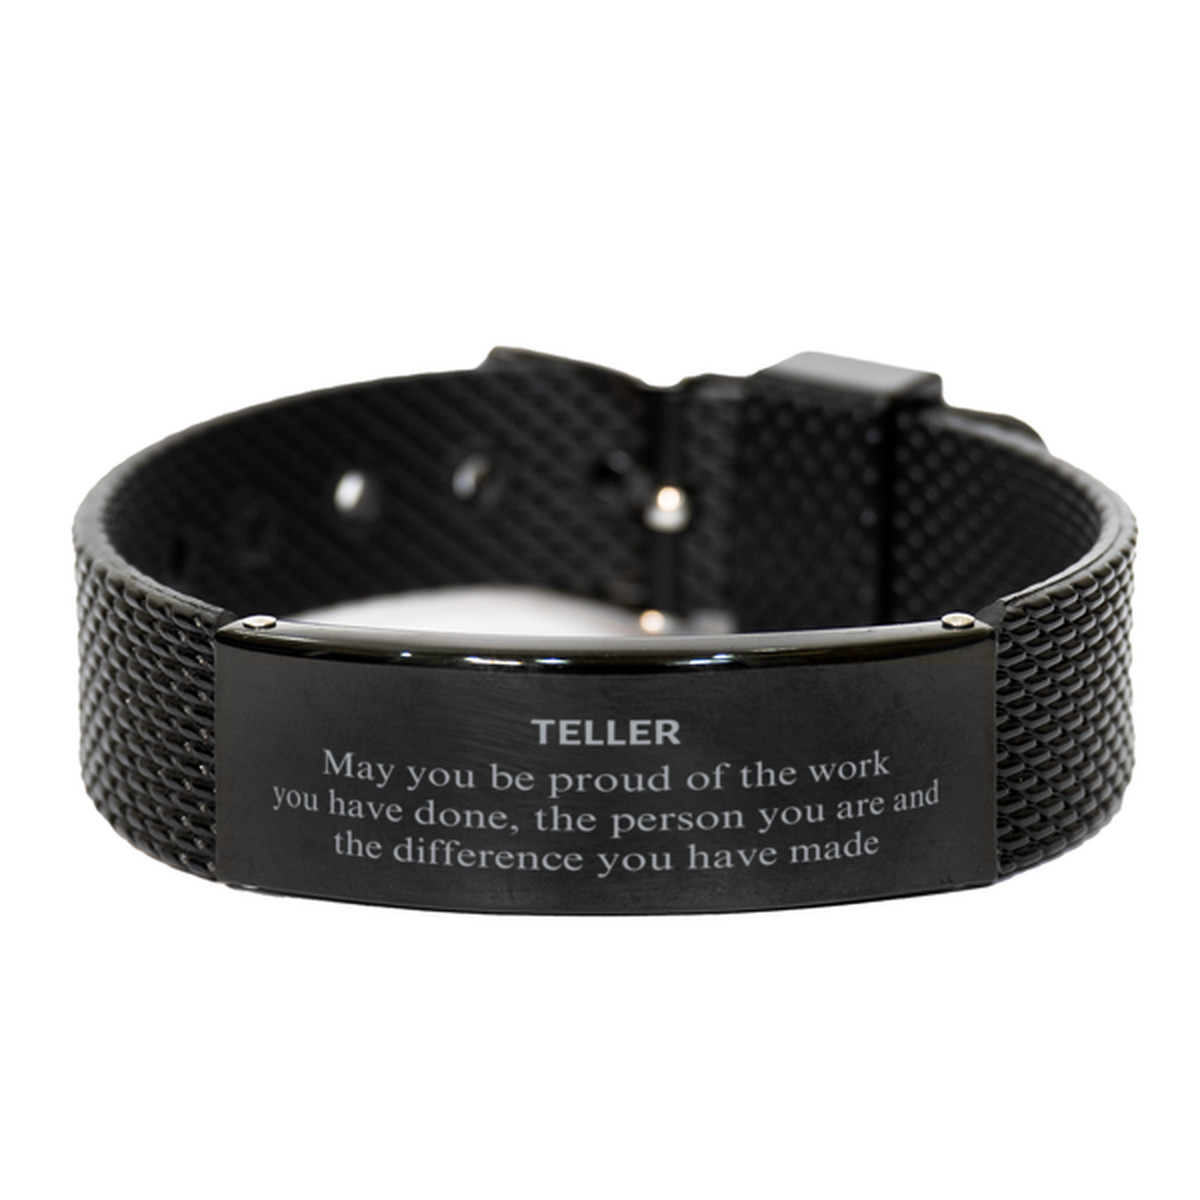 Teller May you be proud of the work you have done, Retirement Teller Black Shark Mesh Bracelet for Colleague Appreciation Gifts Amazing for Teller